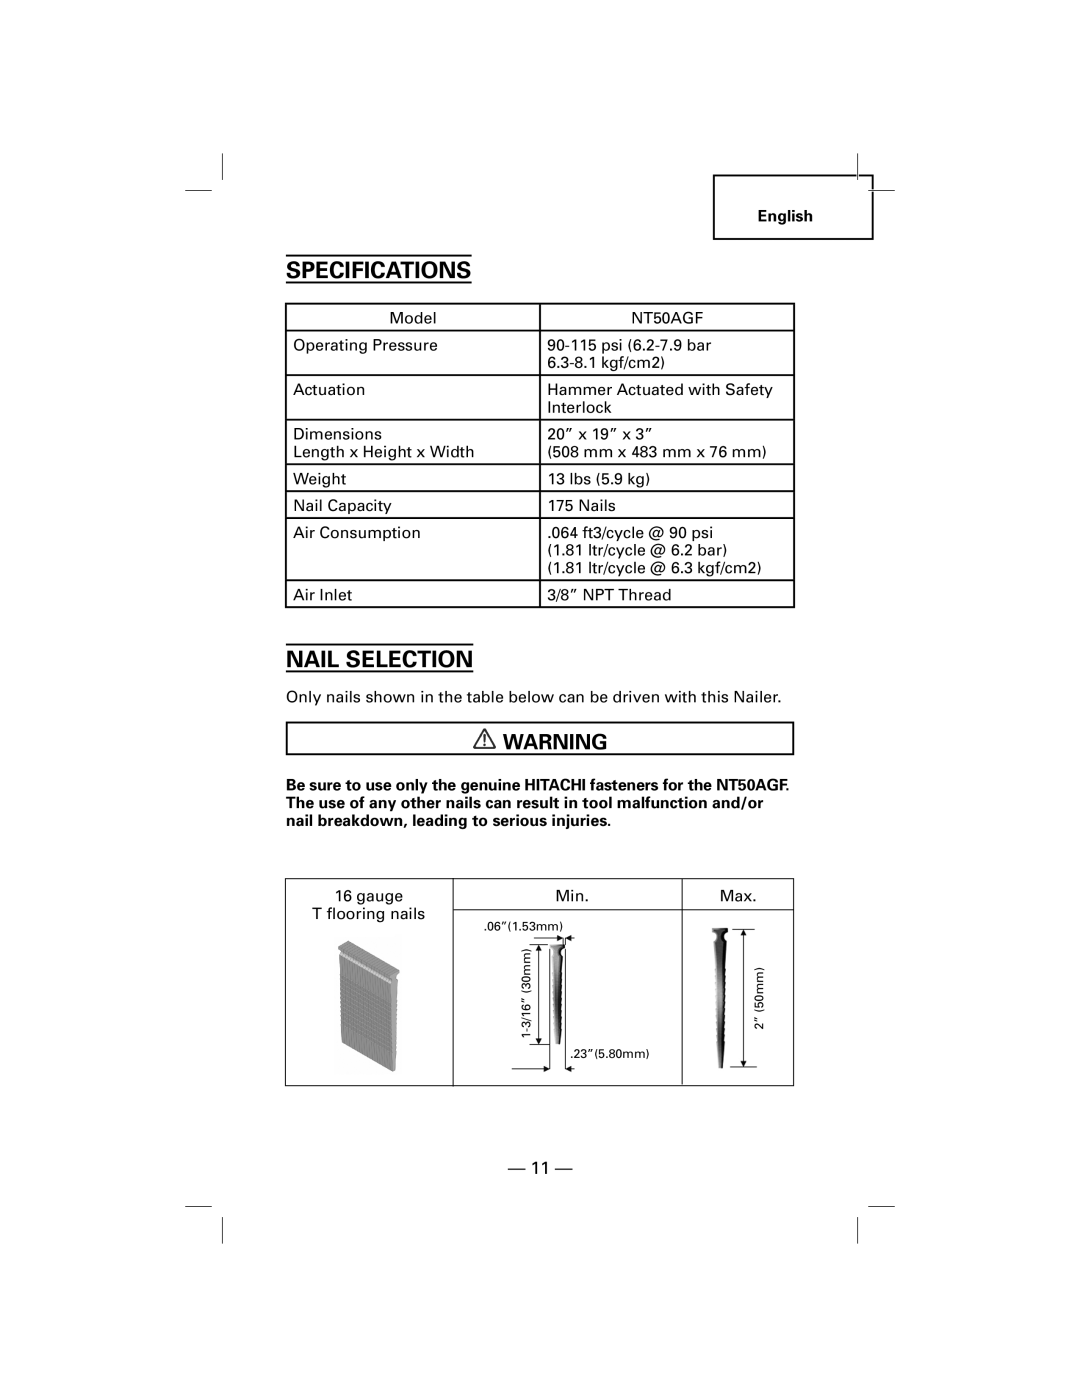 Hitachi NT50AGF manual Specifications, Nail Selection 